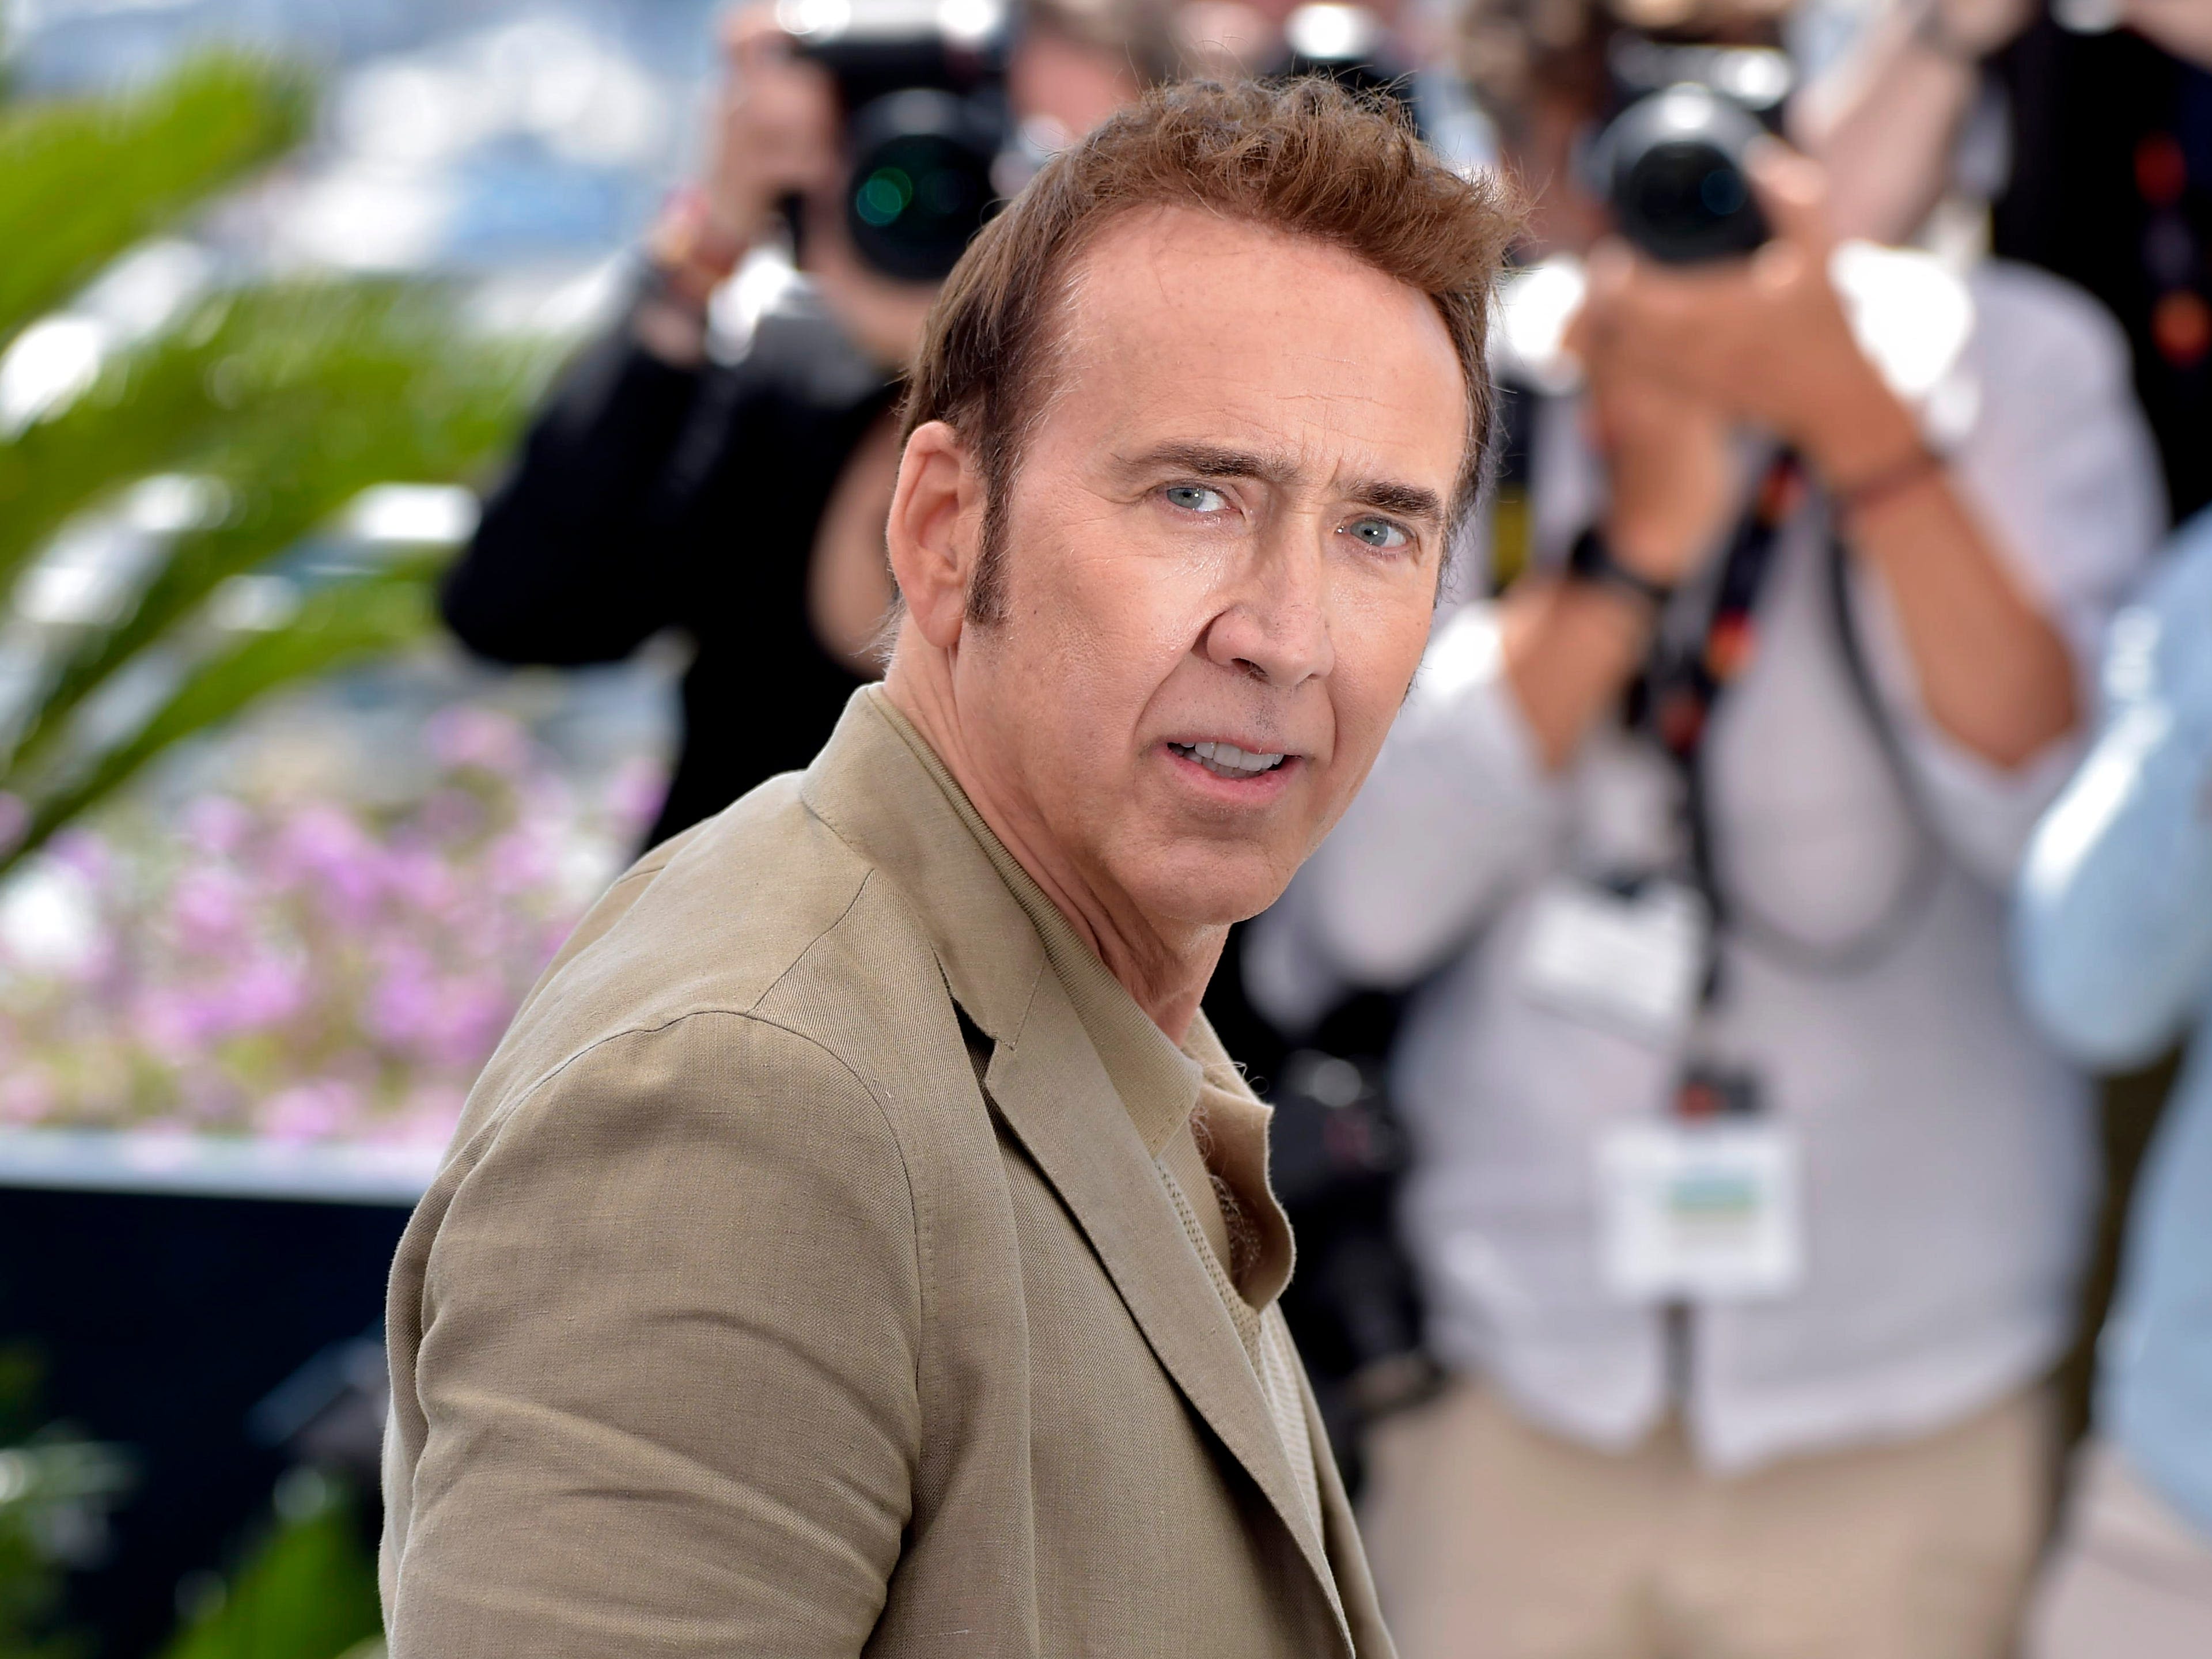 Nicolas Cage says he's 'terrified' of AI: 'They're just going to steal my body and do whatever they want with it'